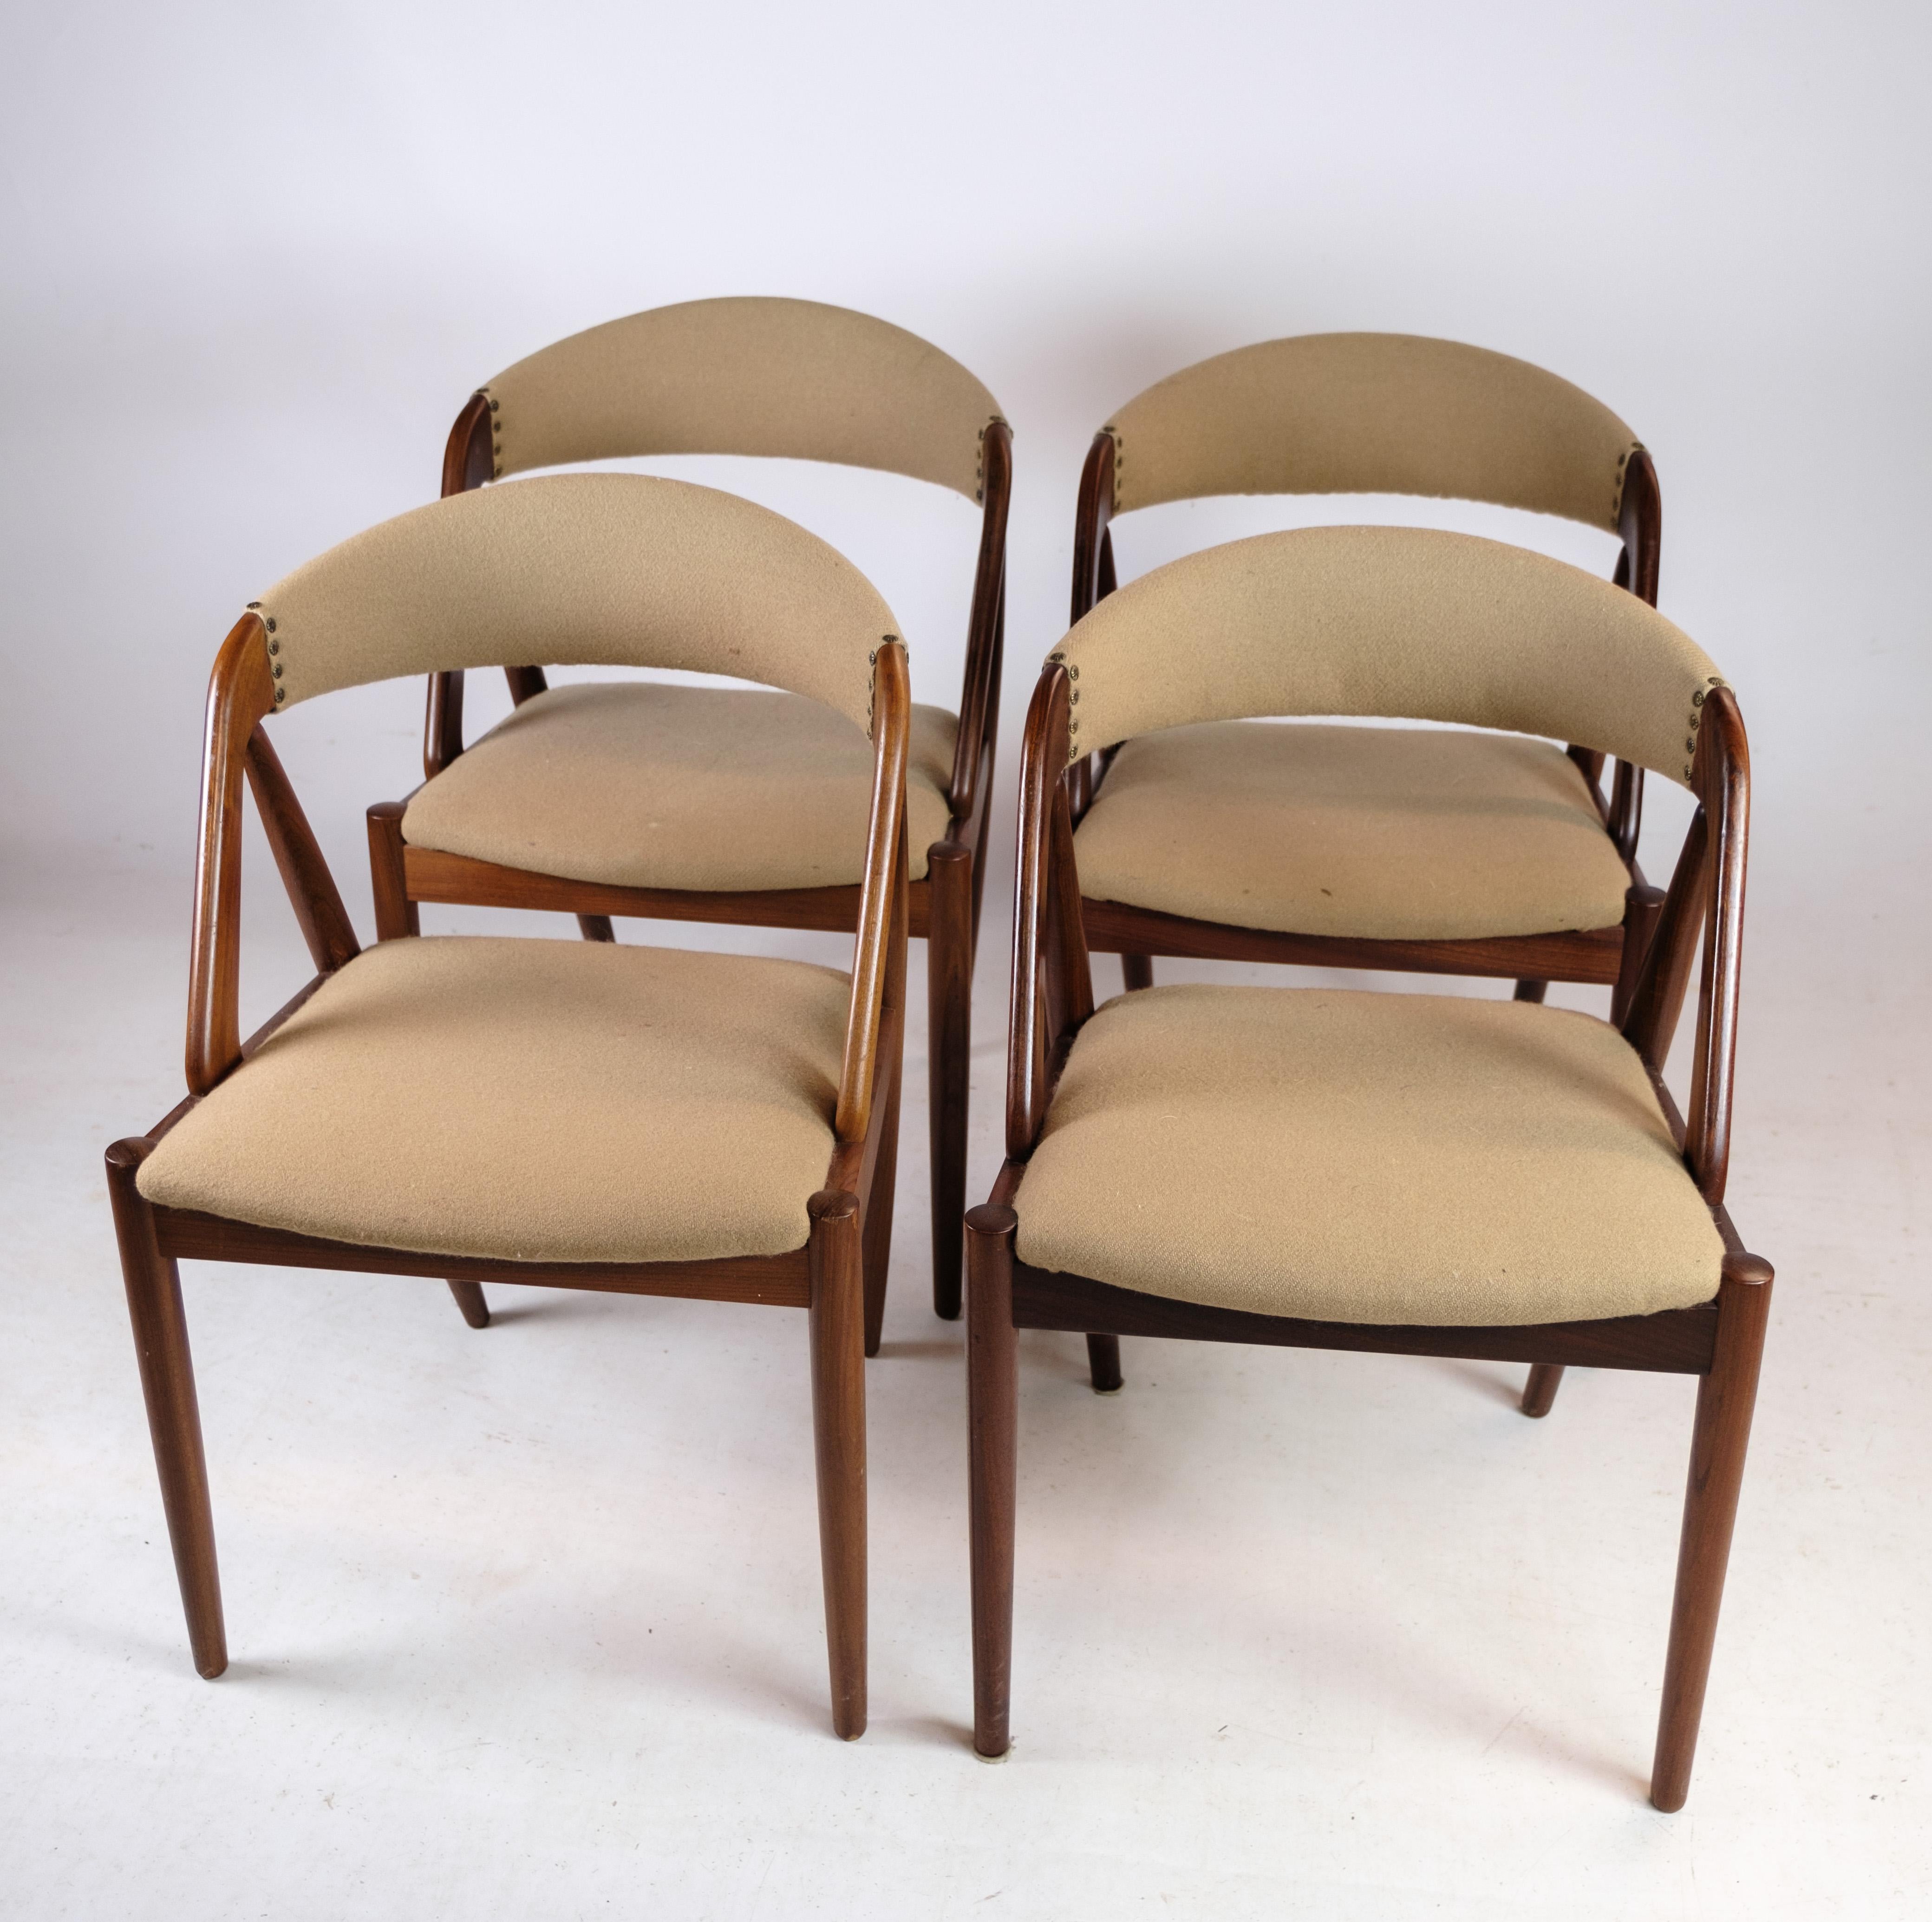 Mid-Century Modern 4 Dining Room Chairs Model 31 Made In Teak, Designed By Kai Kristiansen For Sale